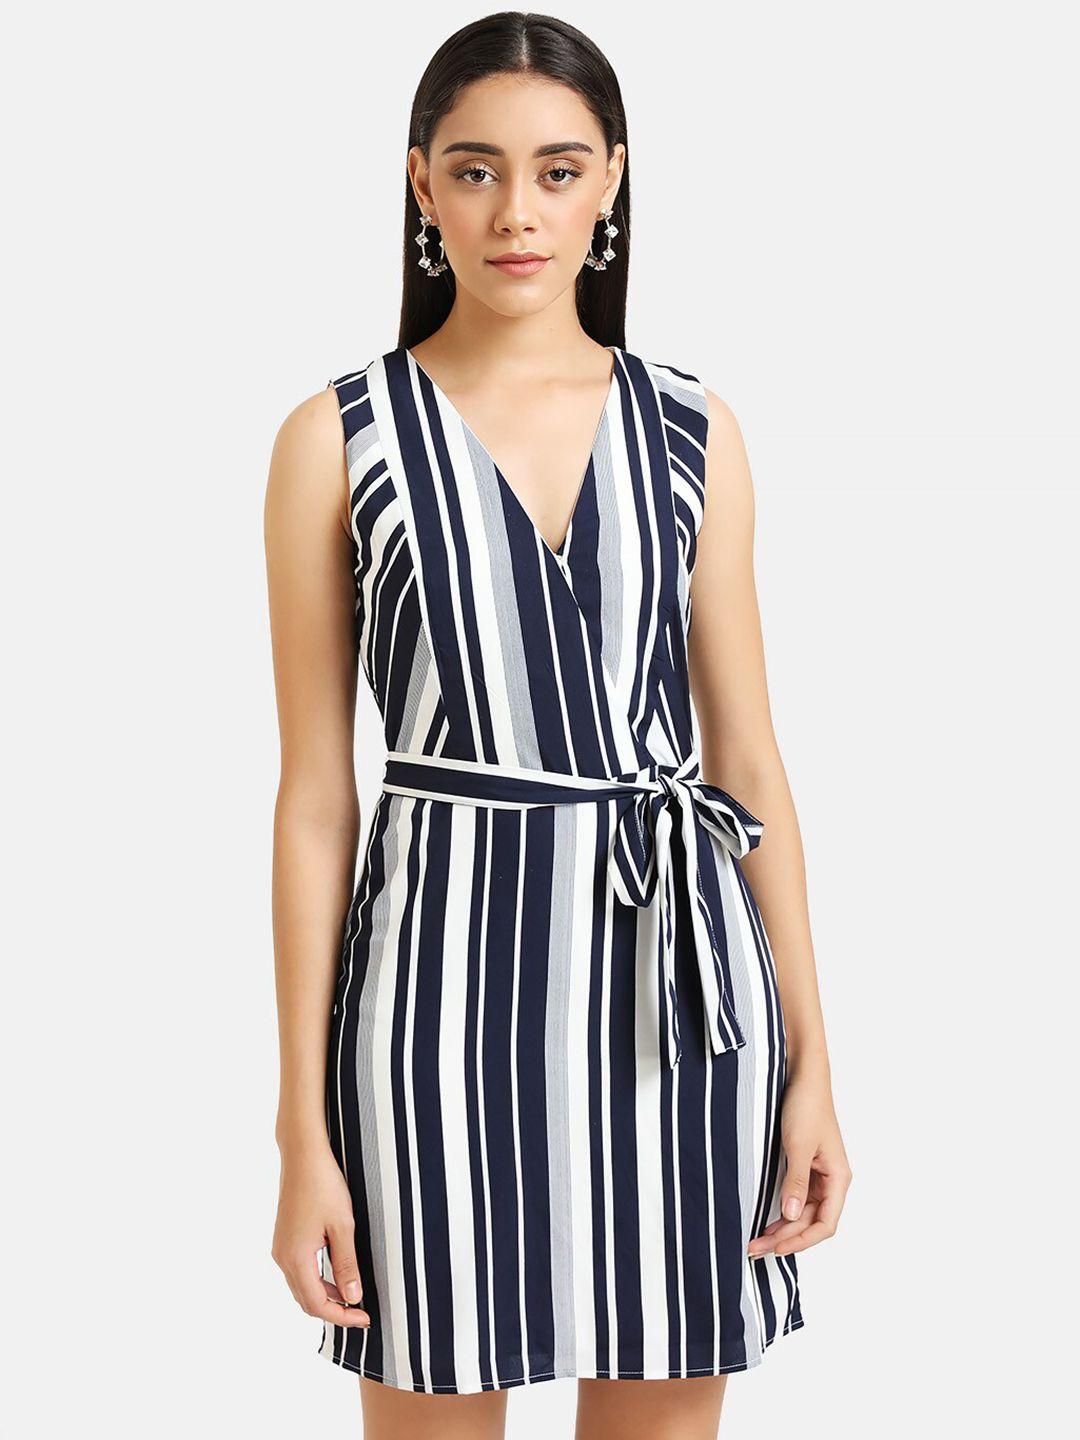 kazo-women-navy-blue-&-white-striped-fit-and-flare-dress